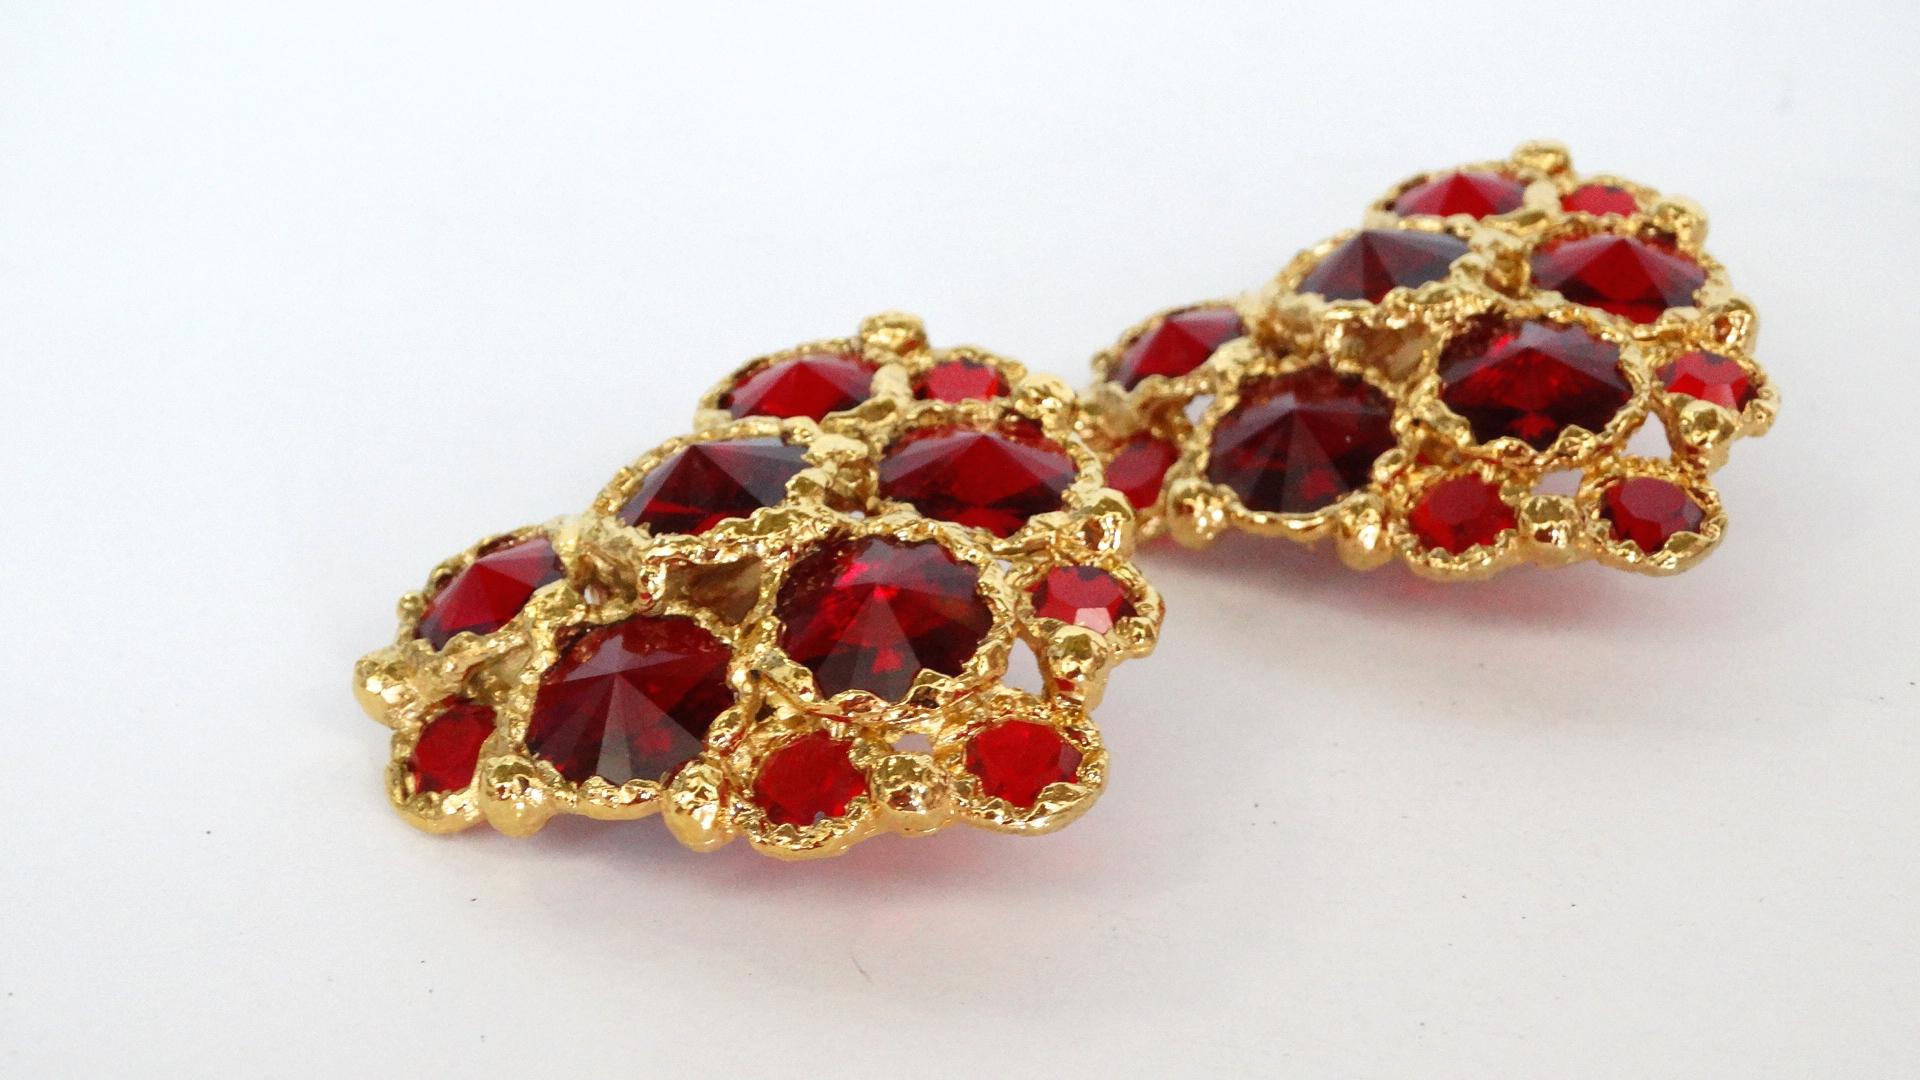 Spread the love with these Christian Lacroix heart shaped statement earrings! Circa 1980's, these clip-on earrings are crumpled textured gold plated with red gripoix gems throughout. Signed Christian LaCroix Made in France on the back of earrings.